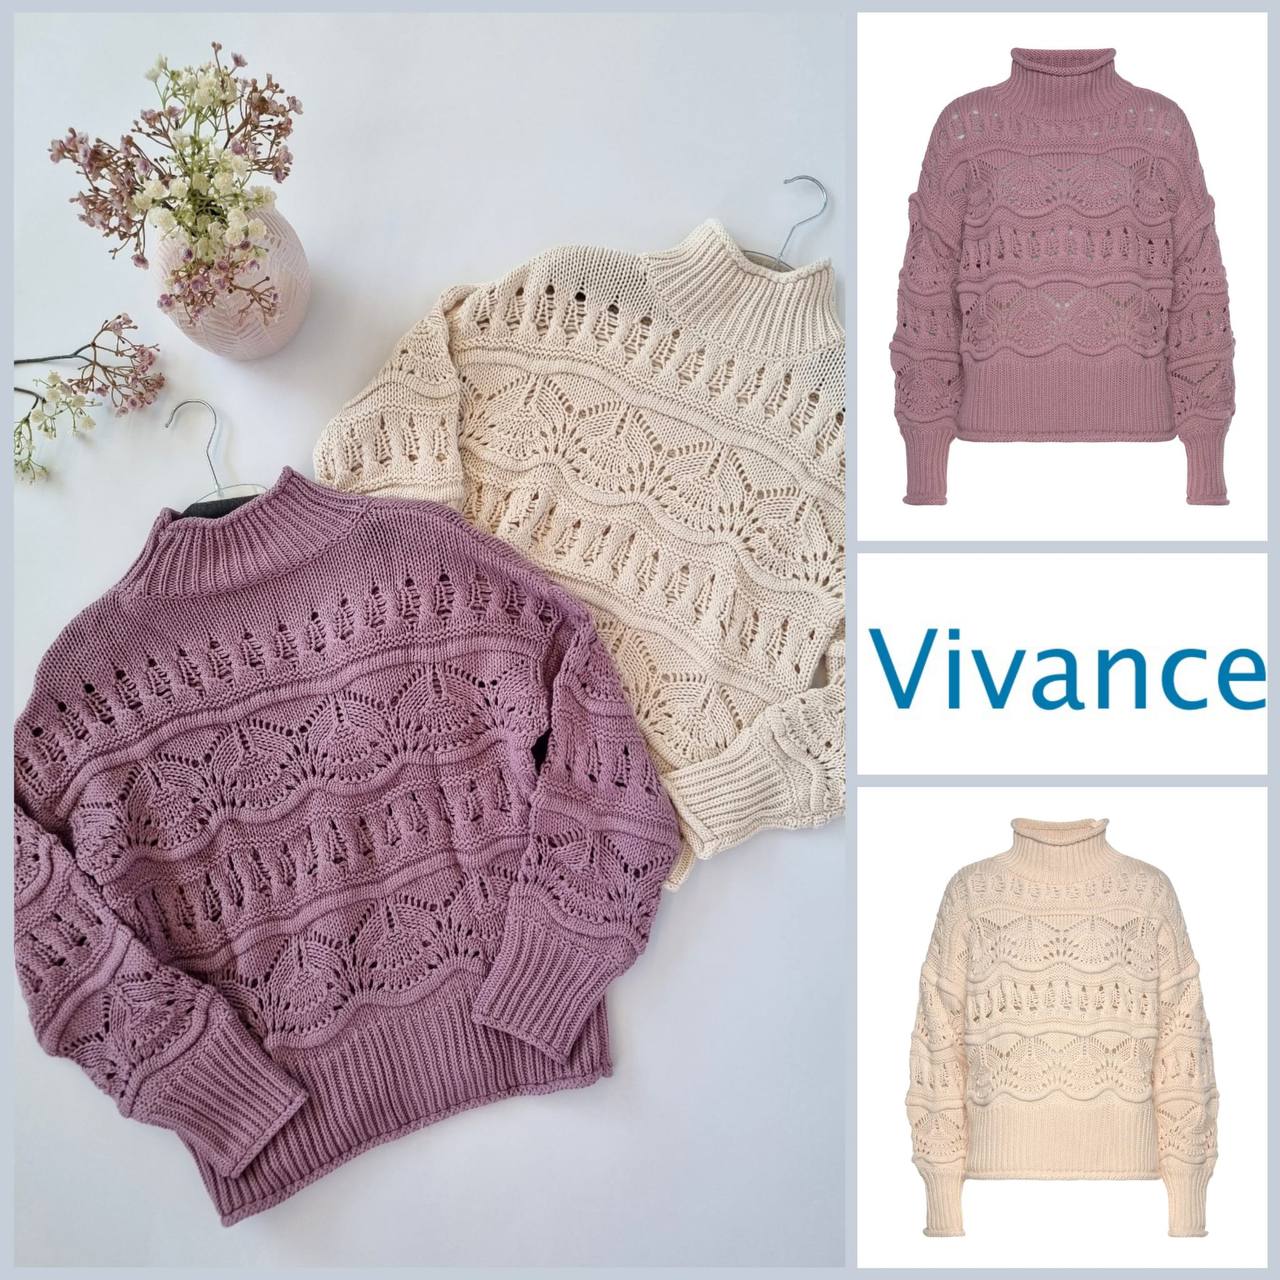 020146 Women's knitted pullover by Vivance